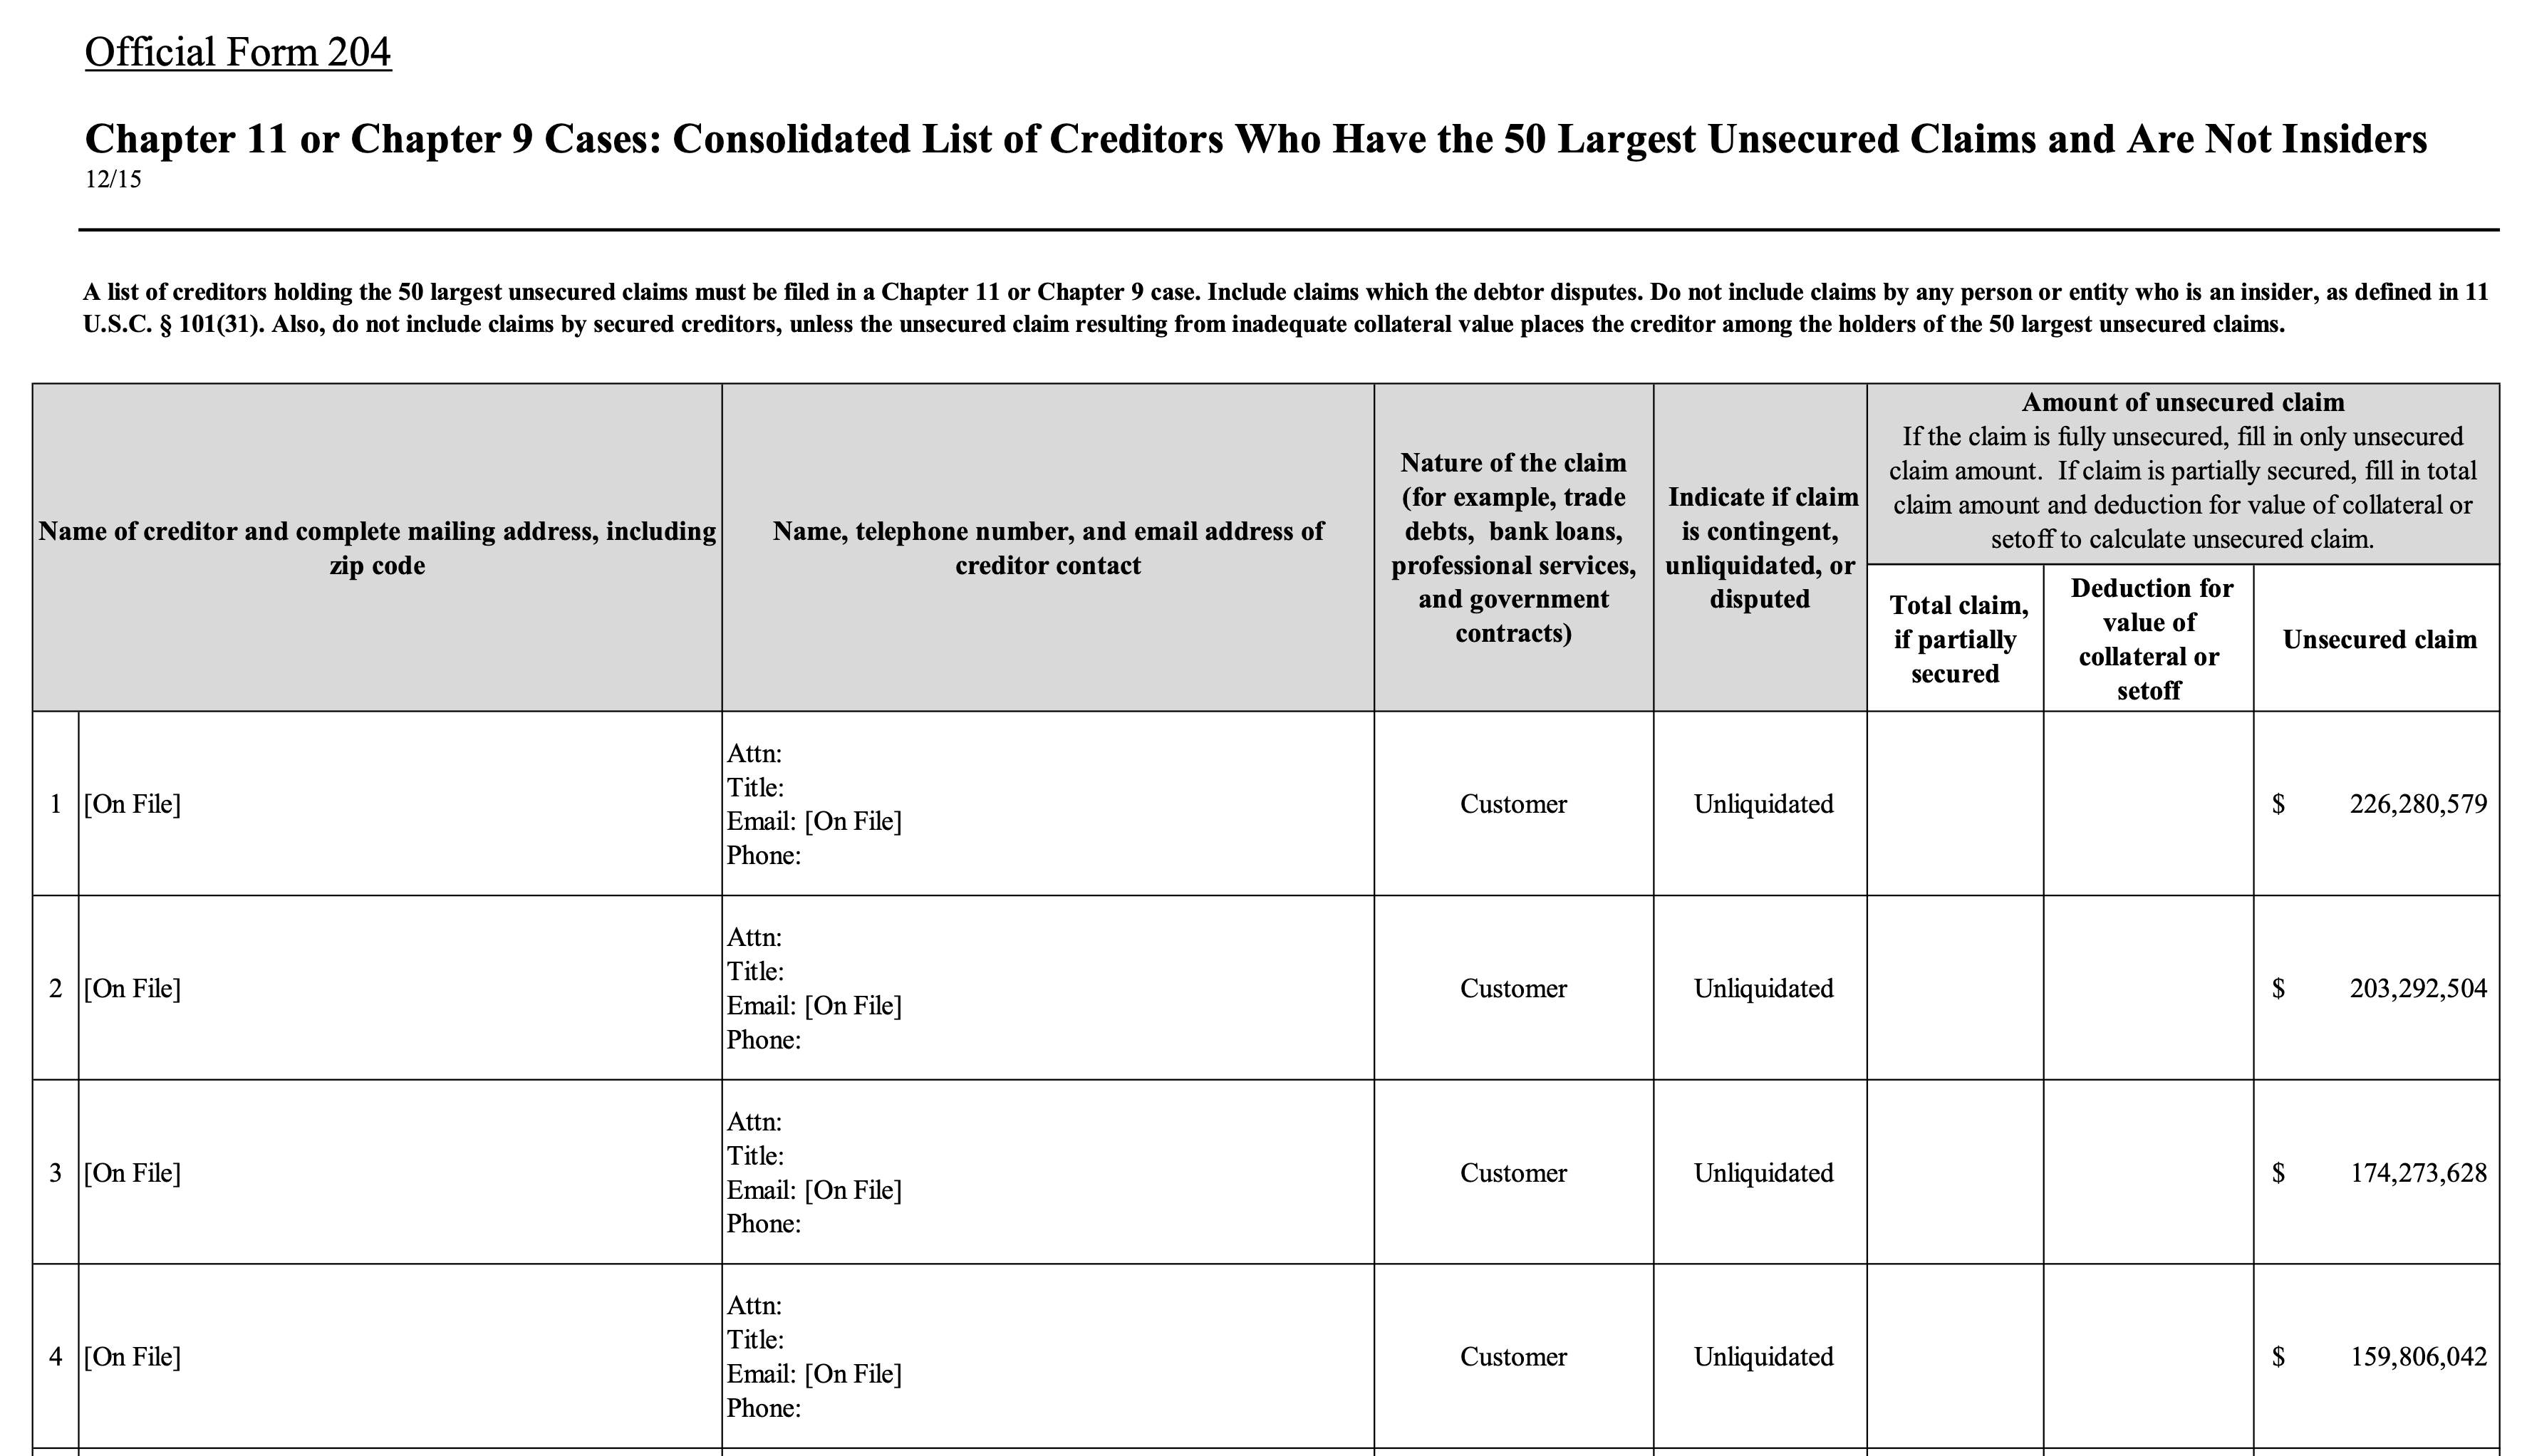 Screenshot of the consolidated list of creditors with the 50 largest unsecured balances. In each table row the name and details simply says "on file".